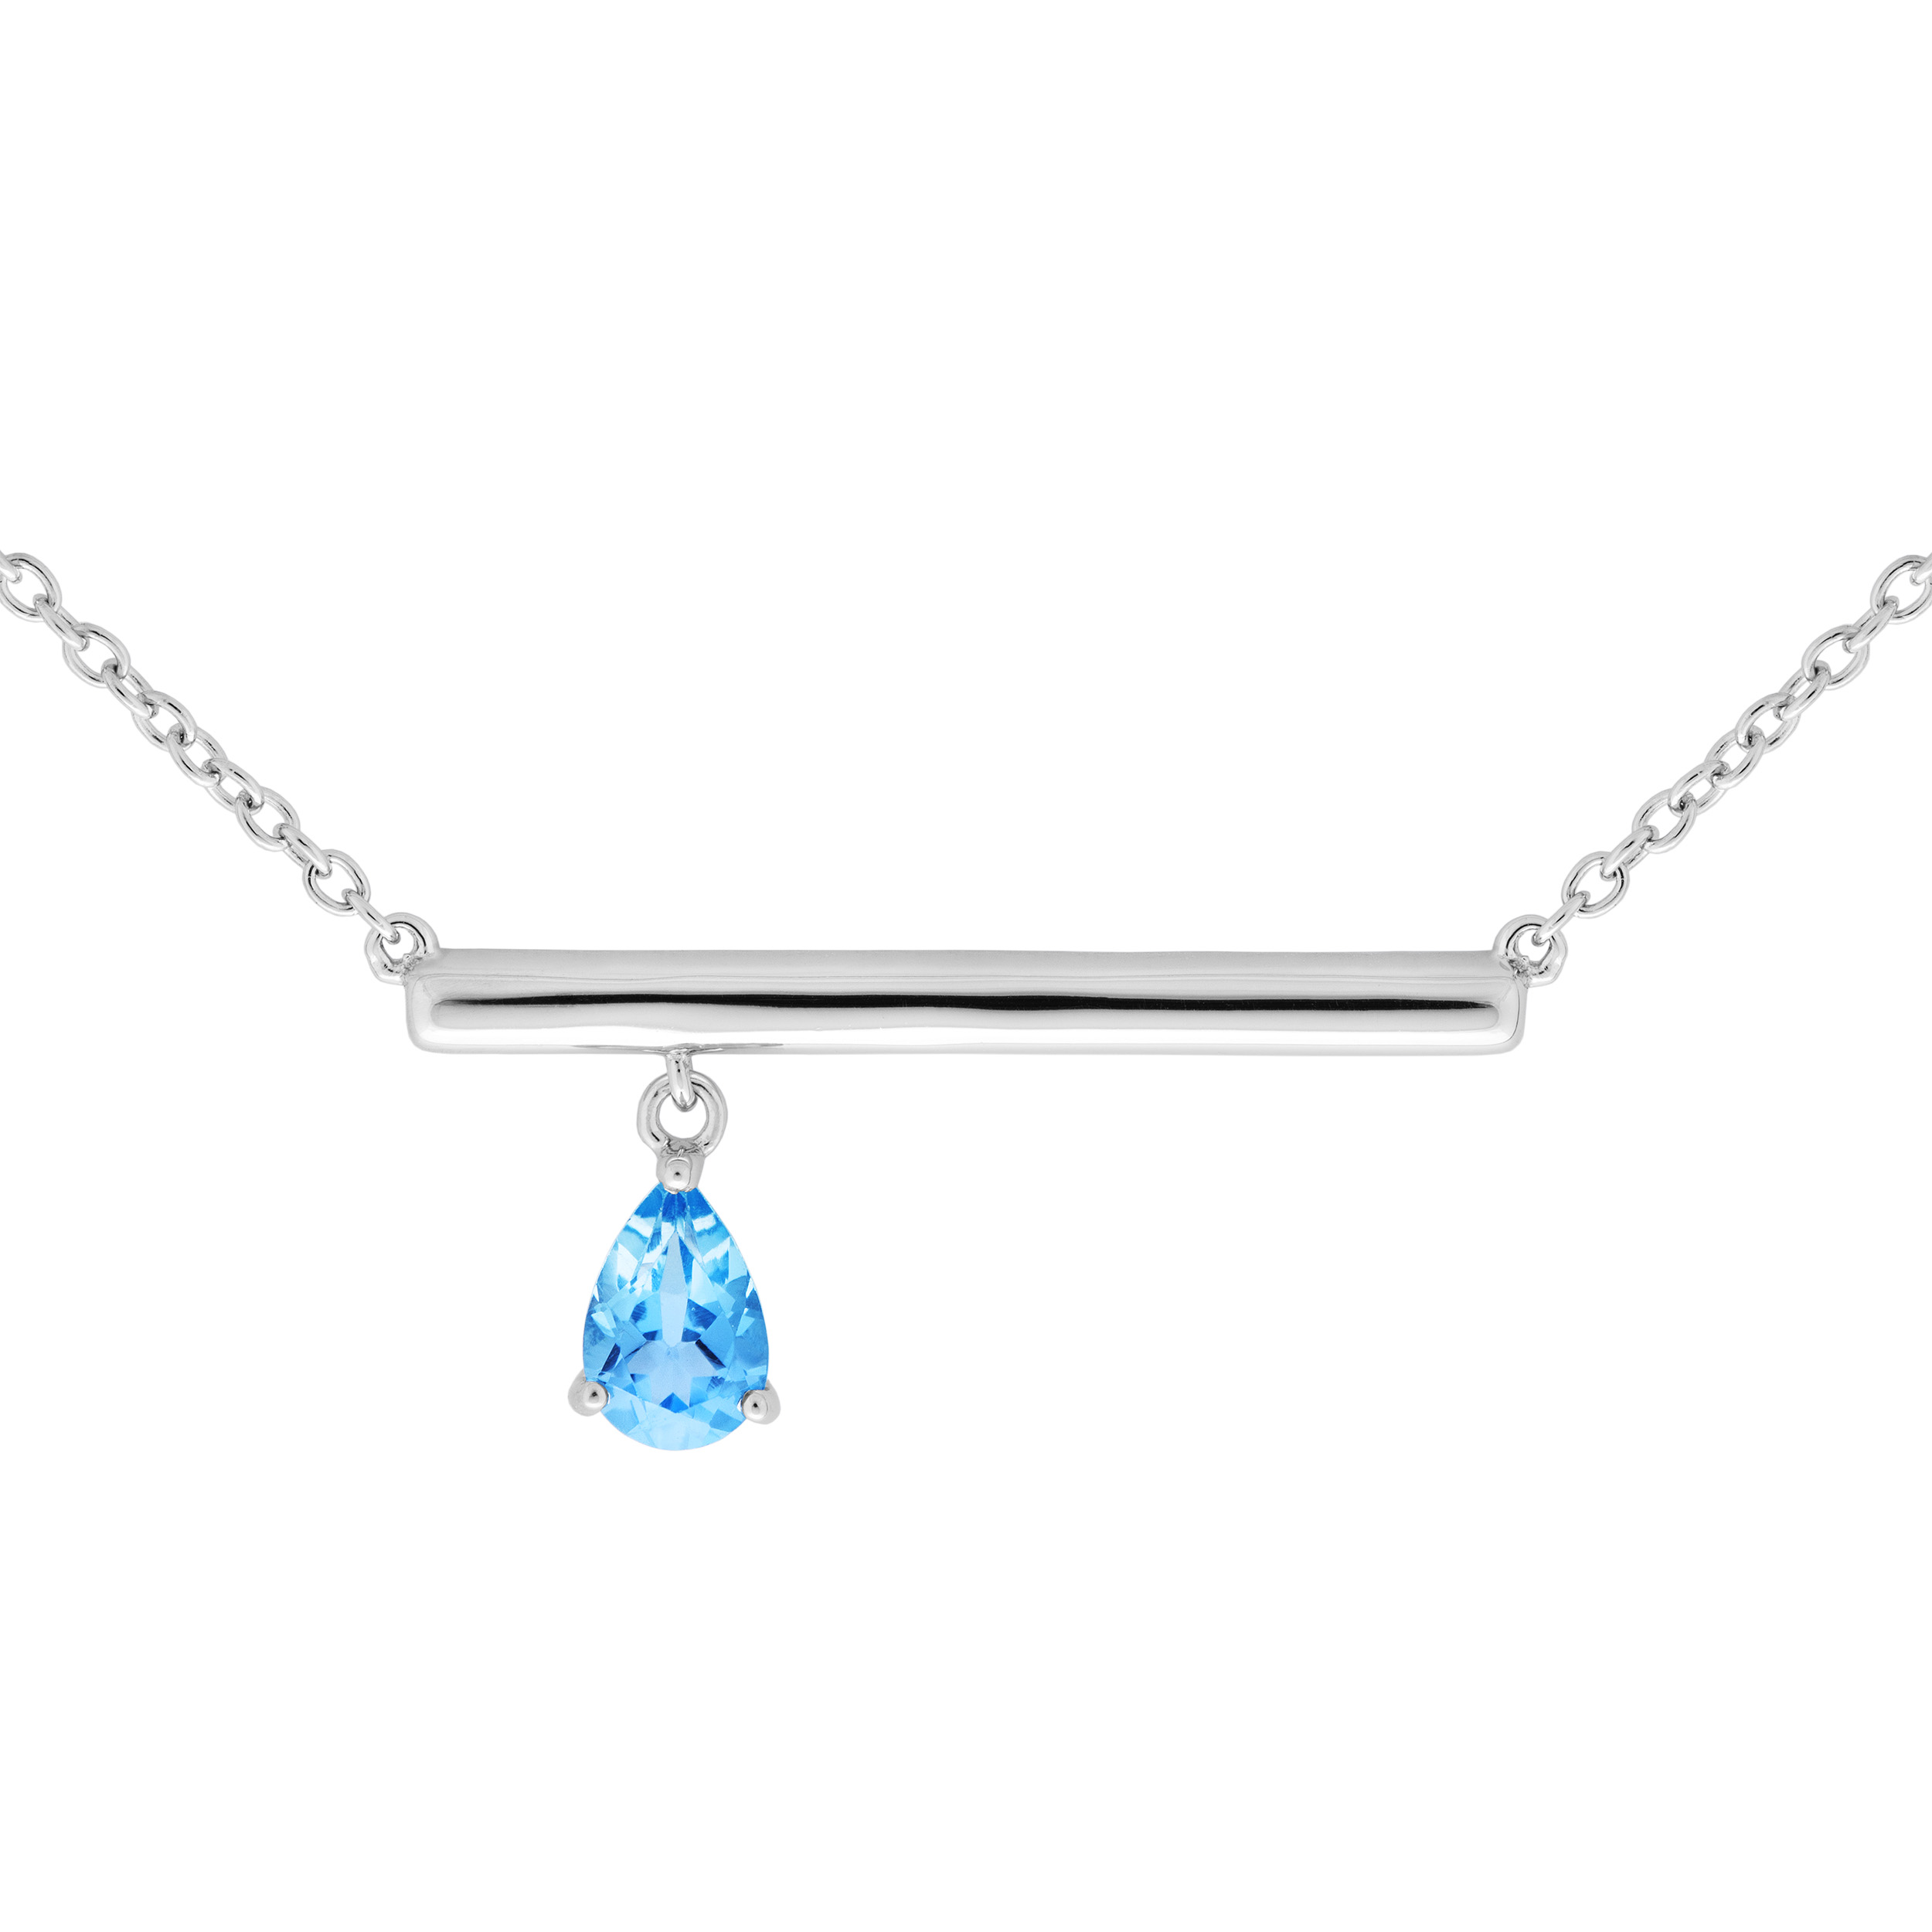 Pear Swiss Blue Topaz Pendant Necklace, Rhodium Plated Sterling Silver